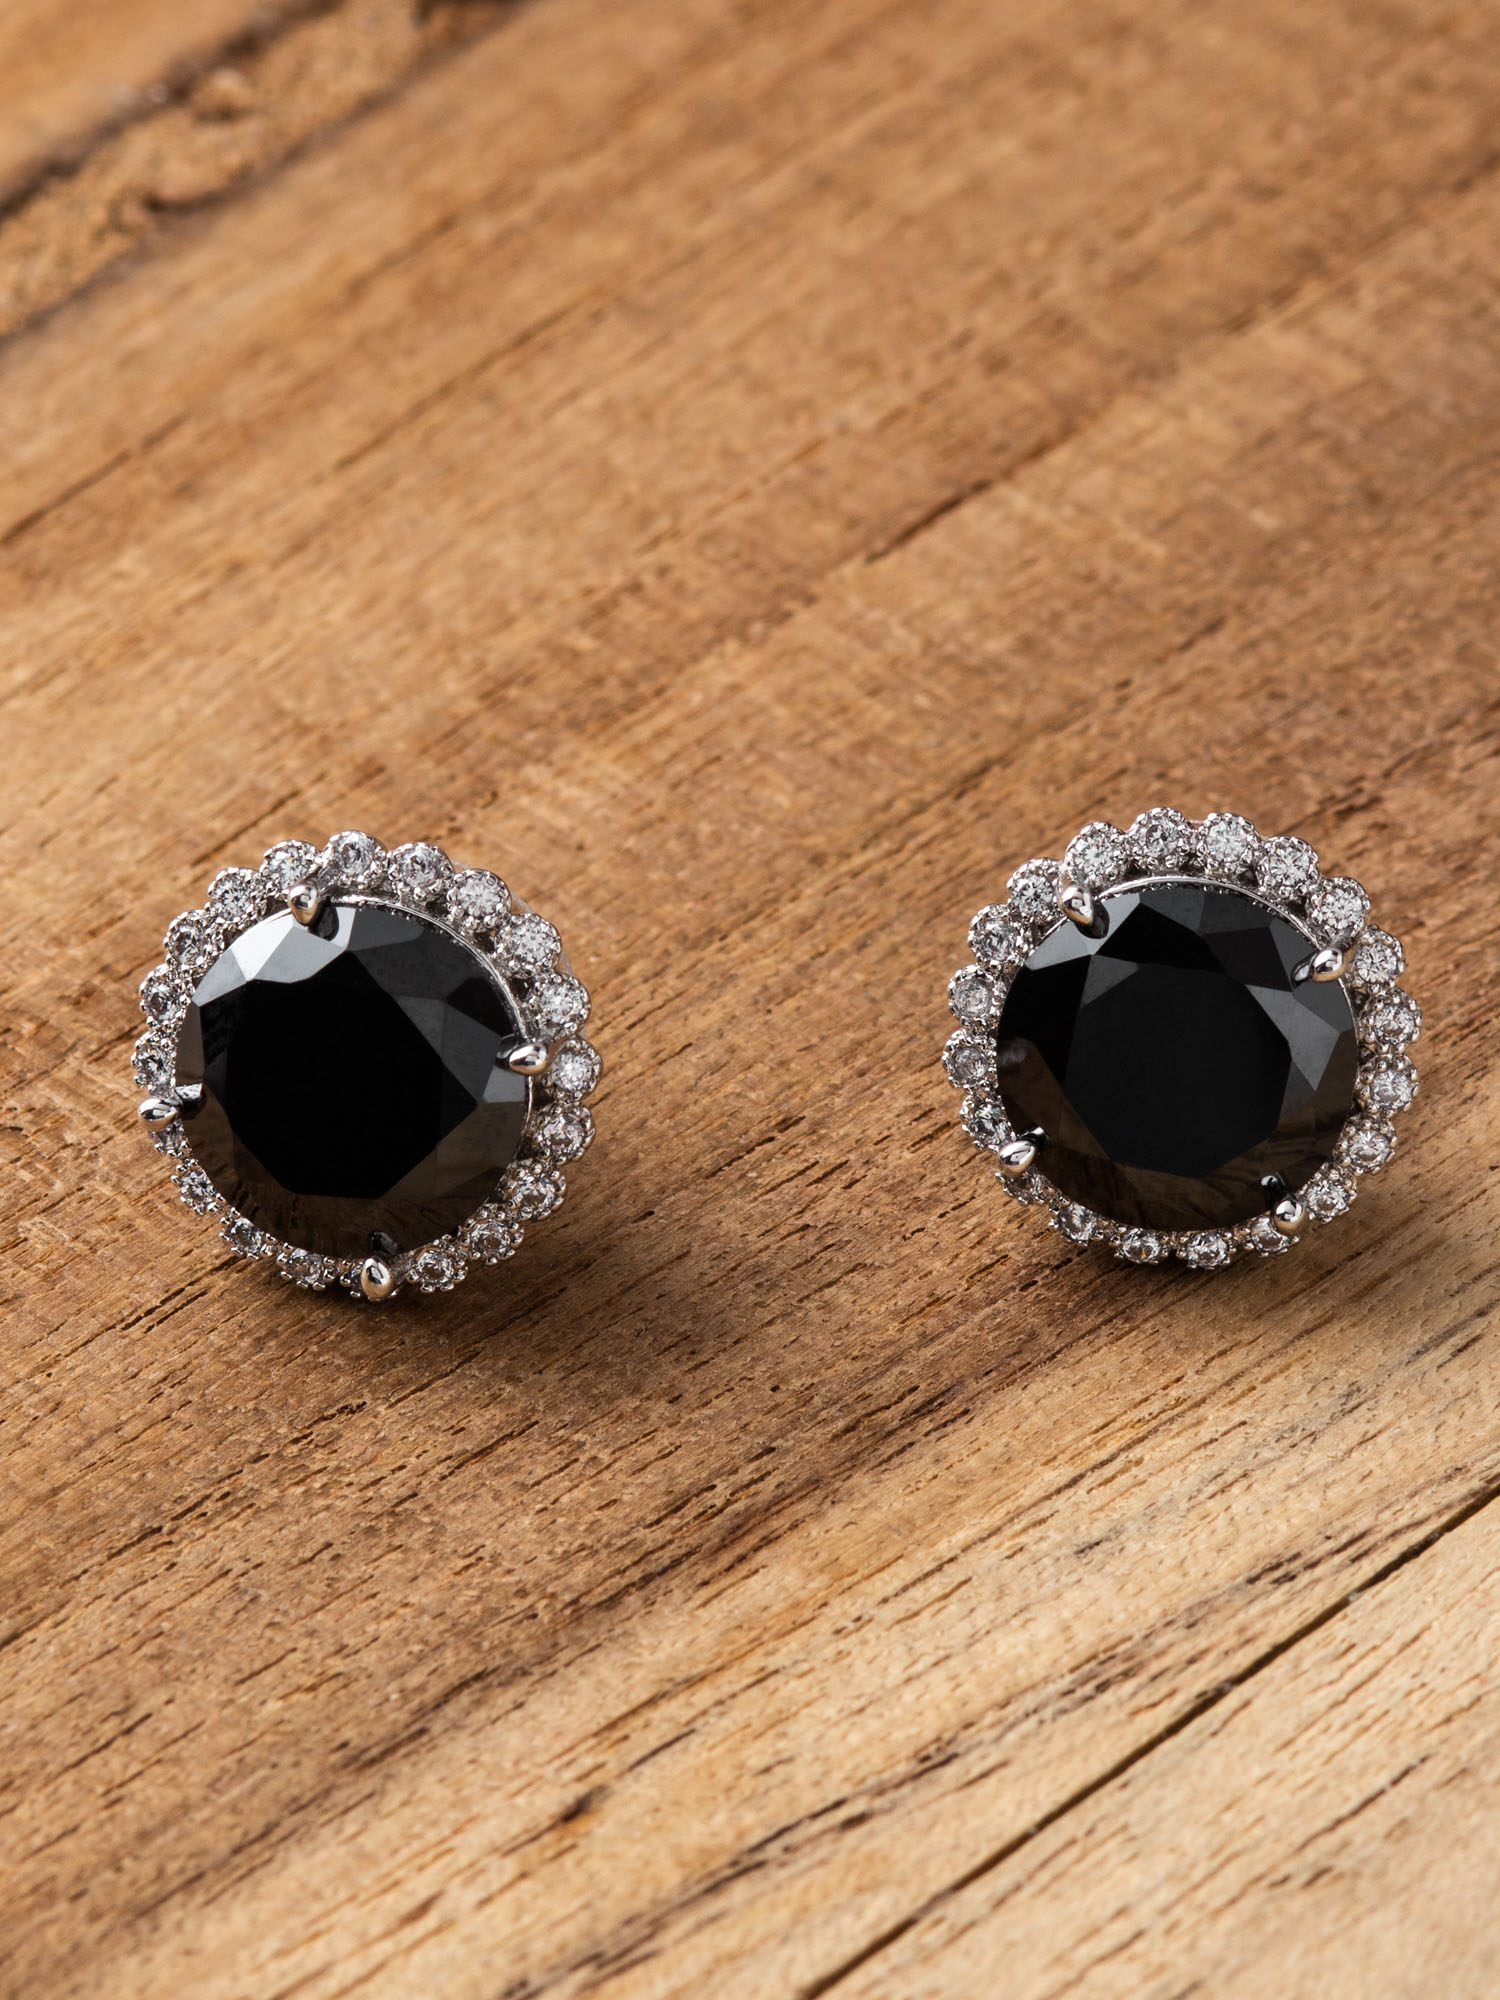 Large Round Black Spinel 6 Prong Stud Earrings - Sarah O.